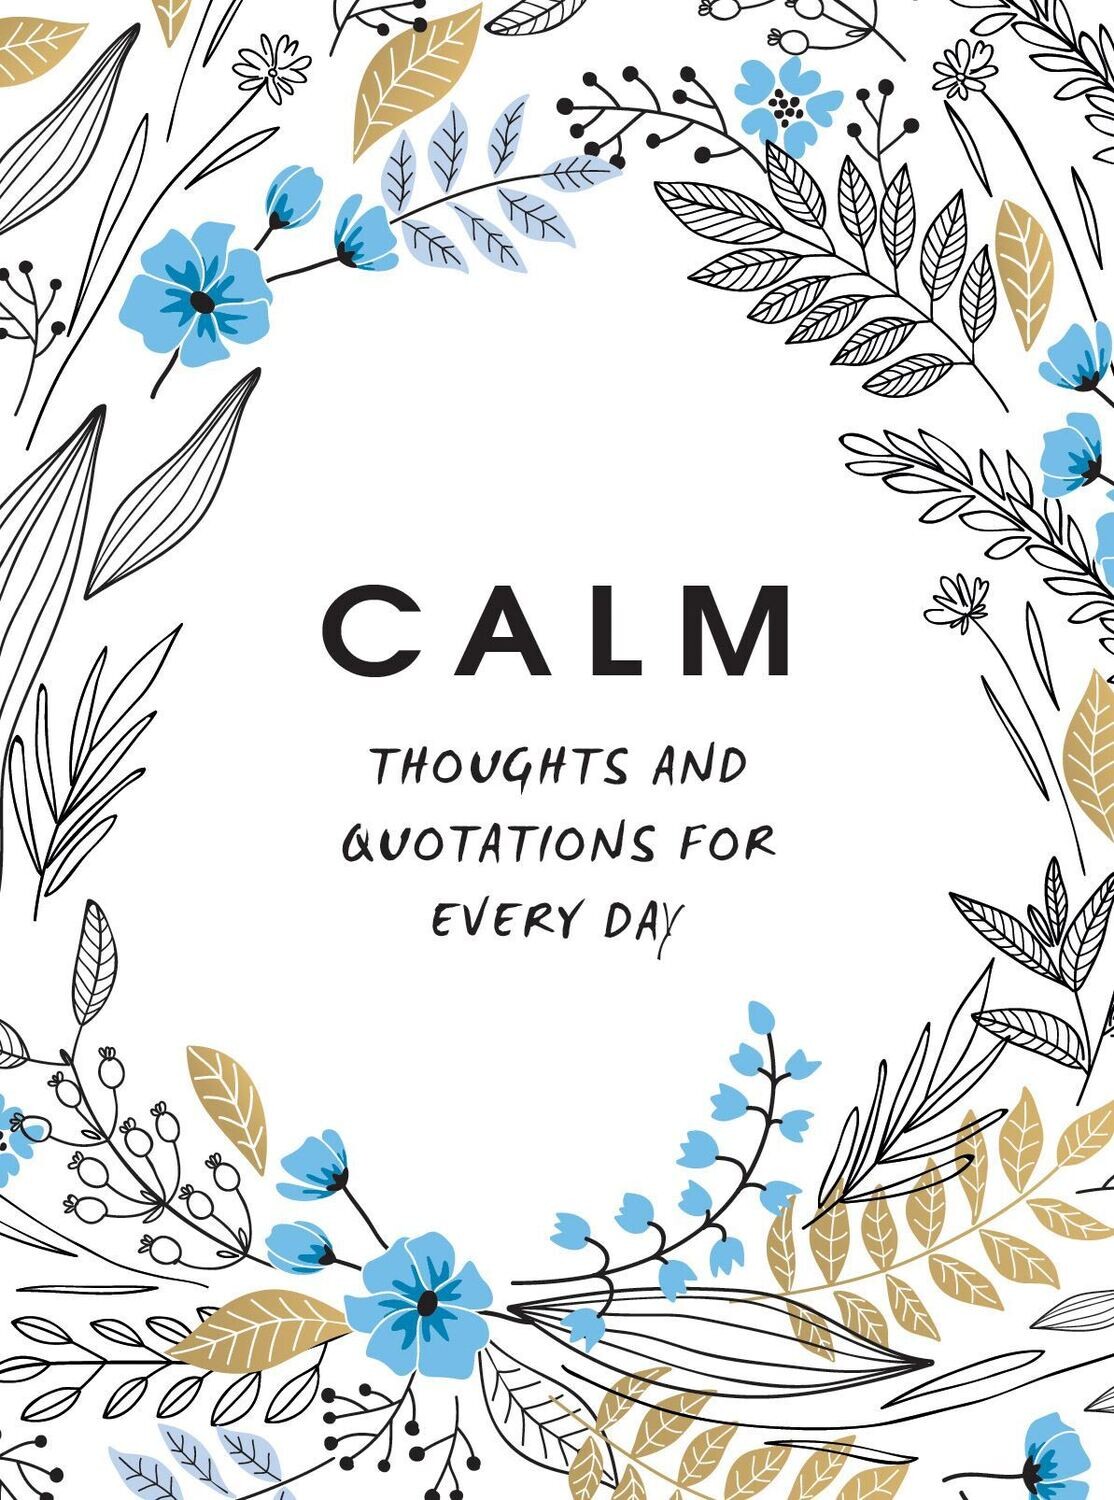 Calm: Thoughts & Quotations for Every Day